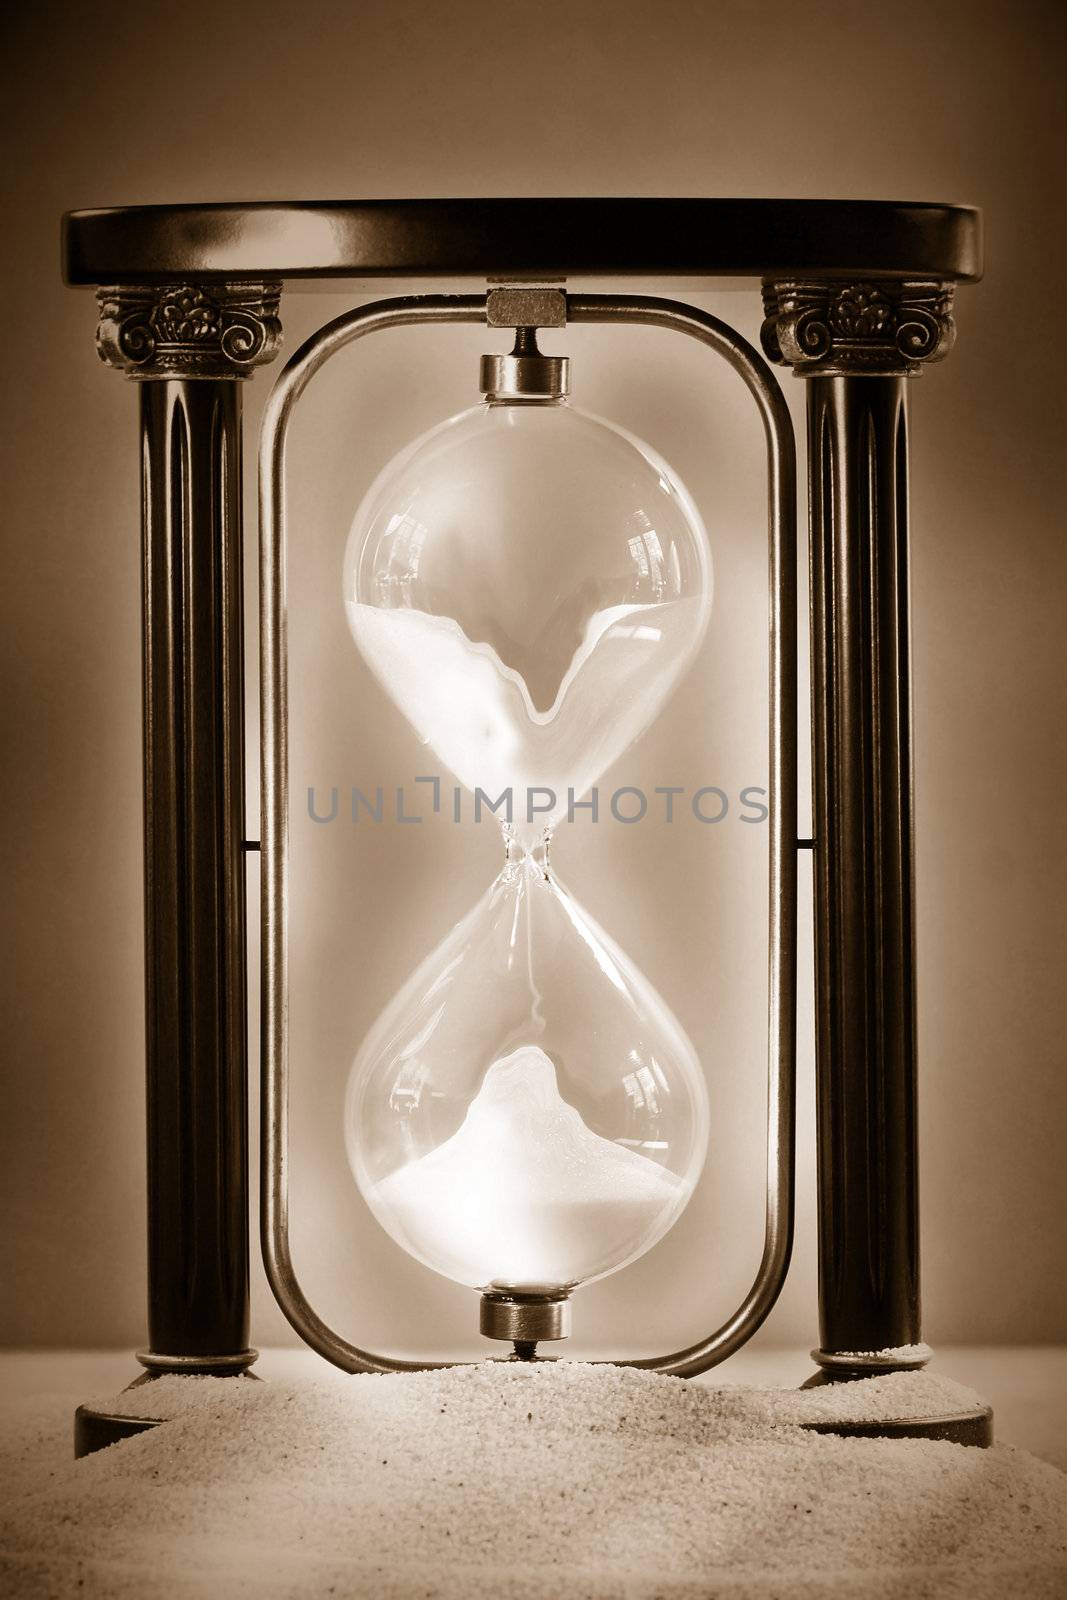 Hourglass resting on beach sand showing sand falling through glass